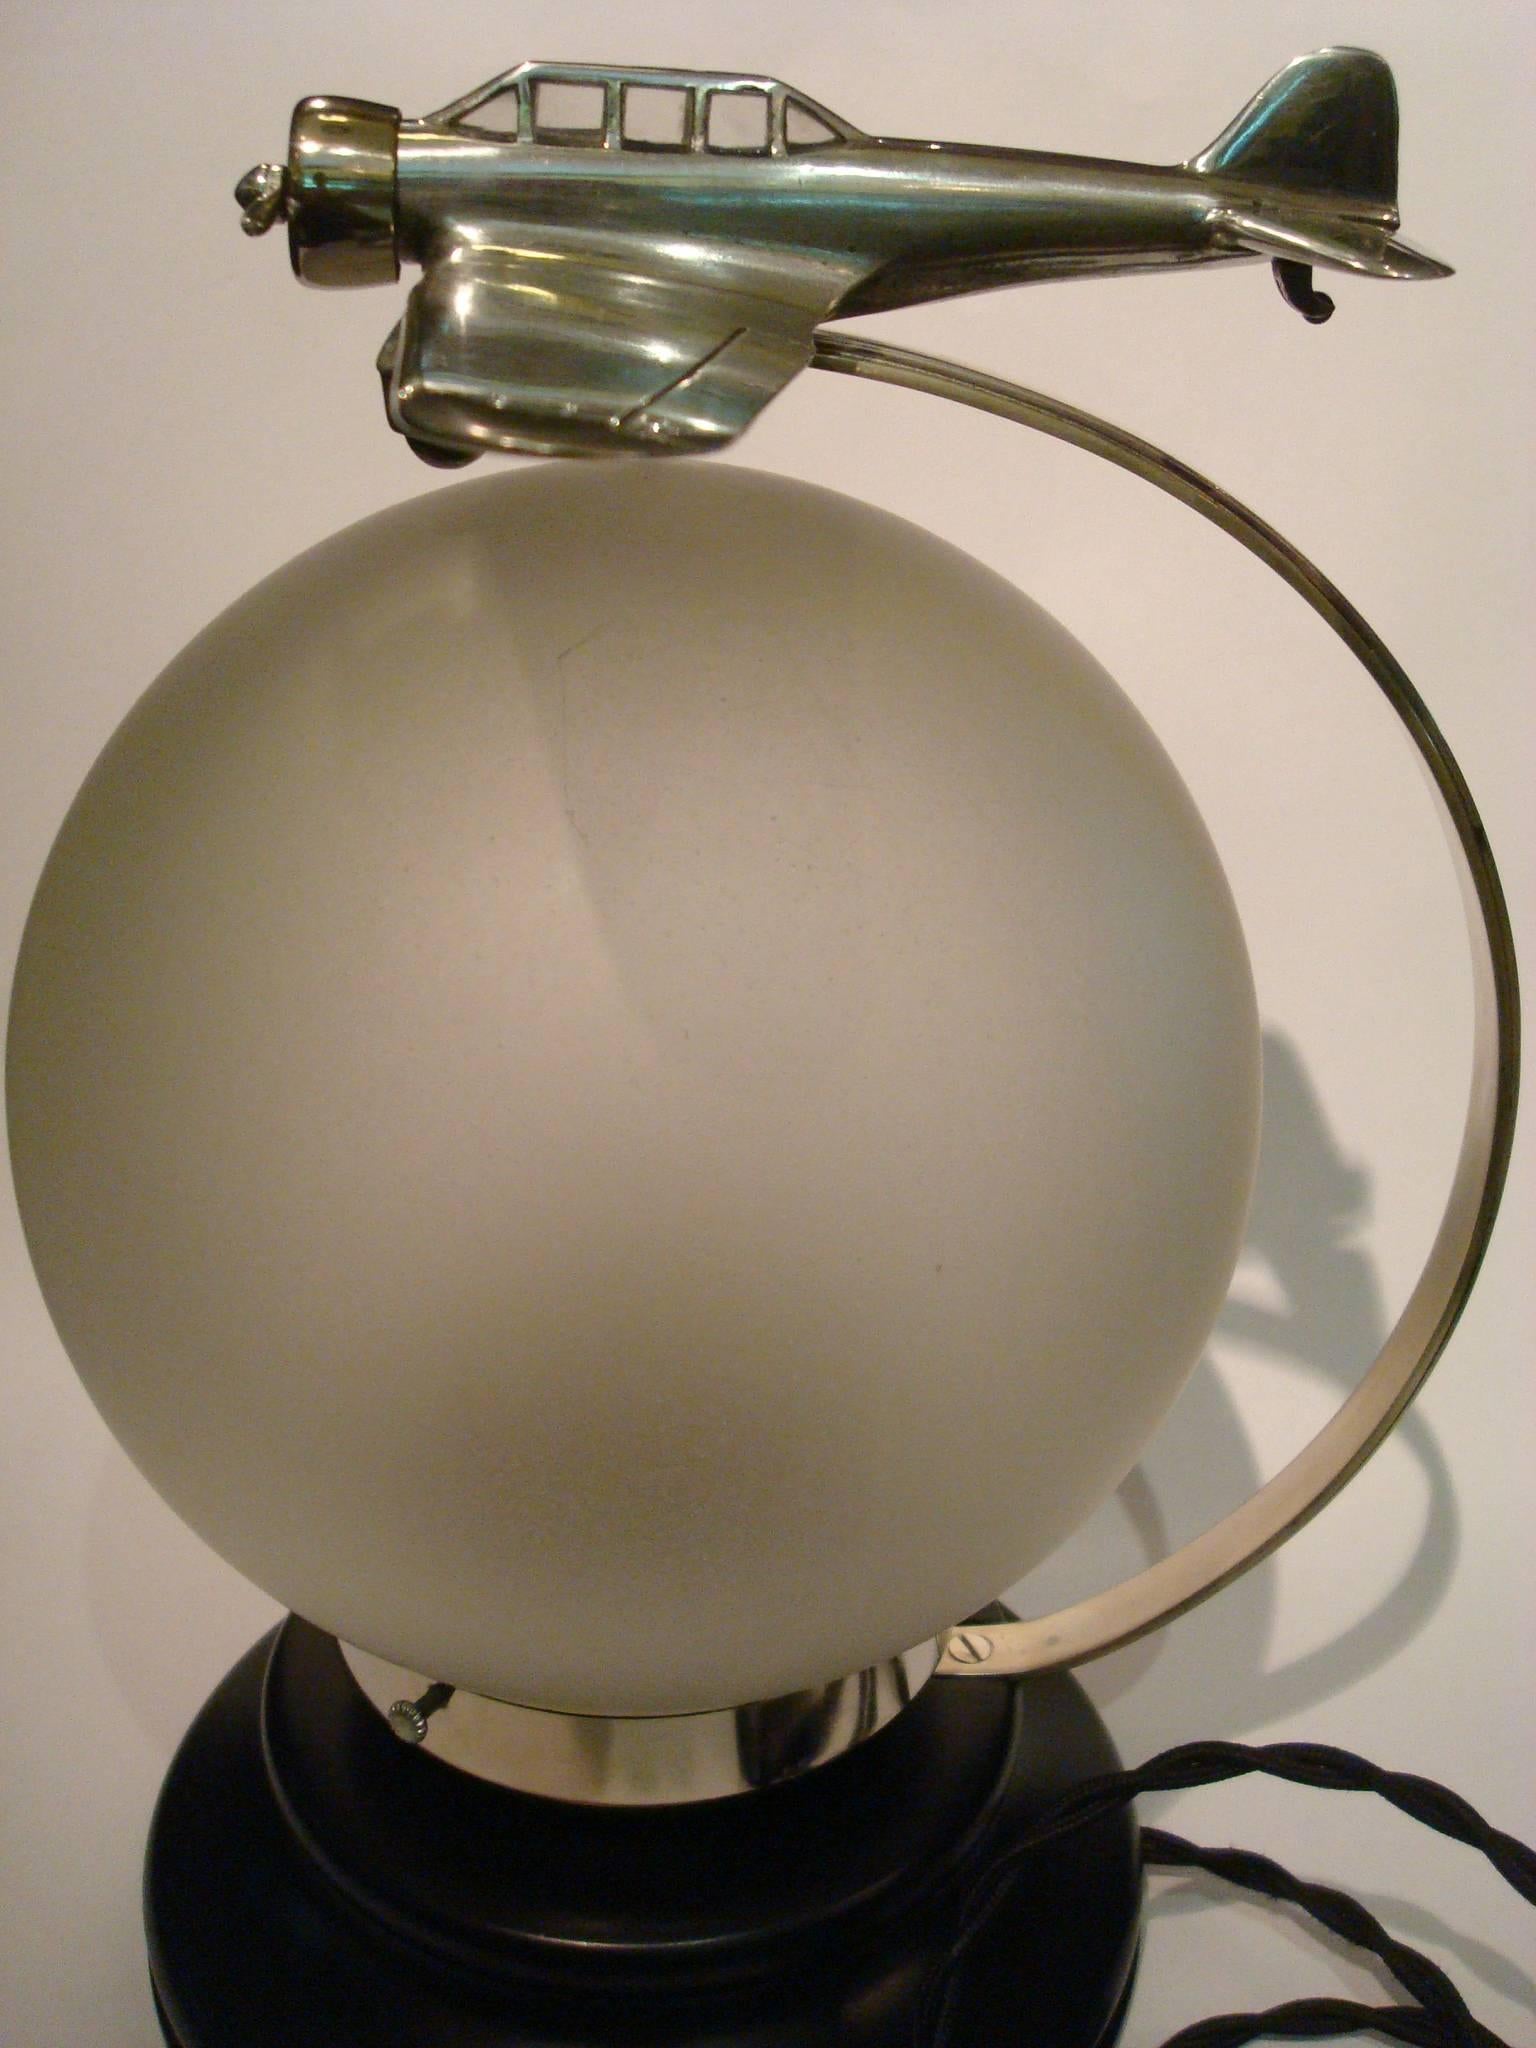 American Airplane Fighter table Lamp. U.S.A., circa 1942